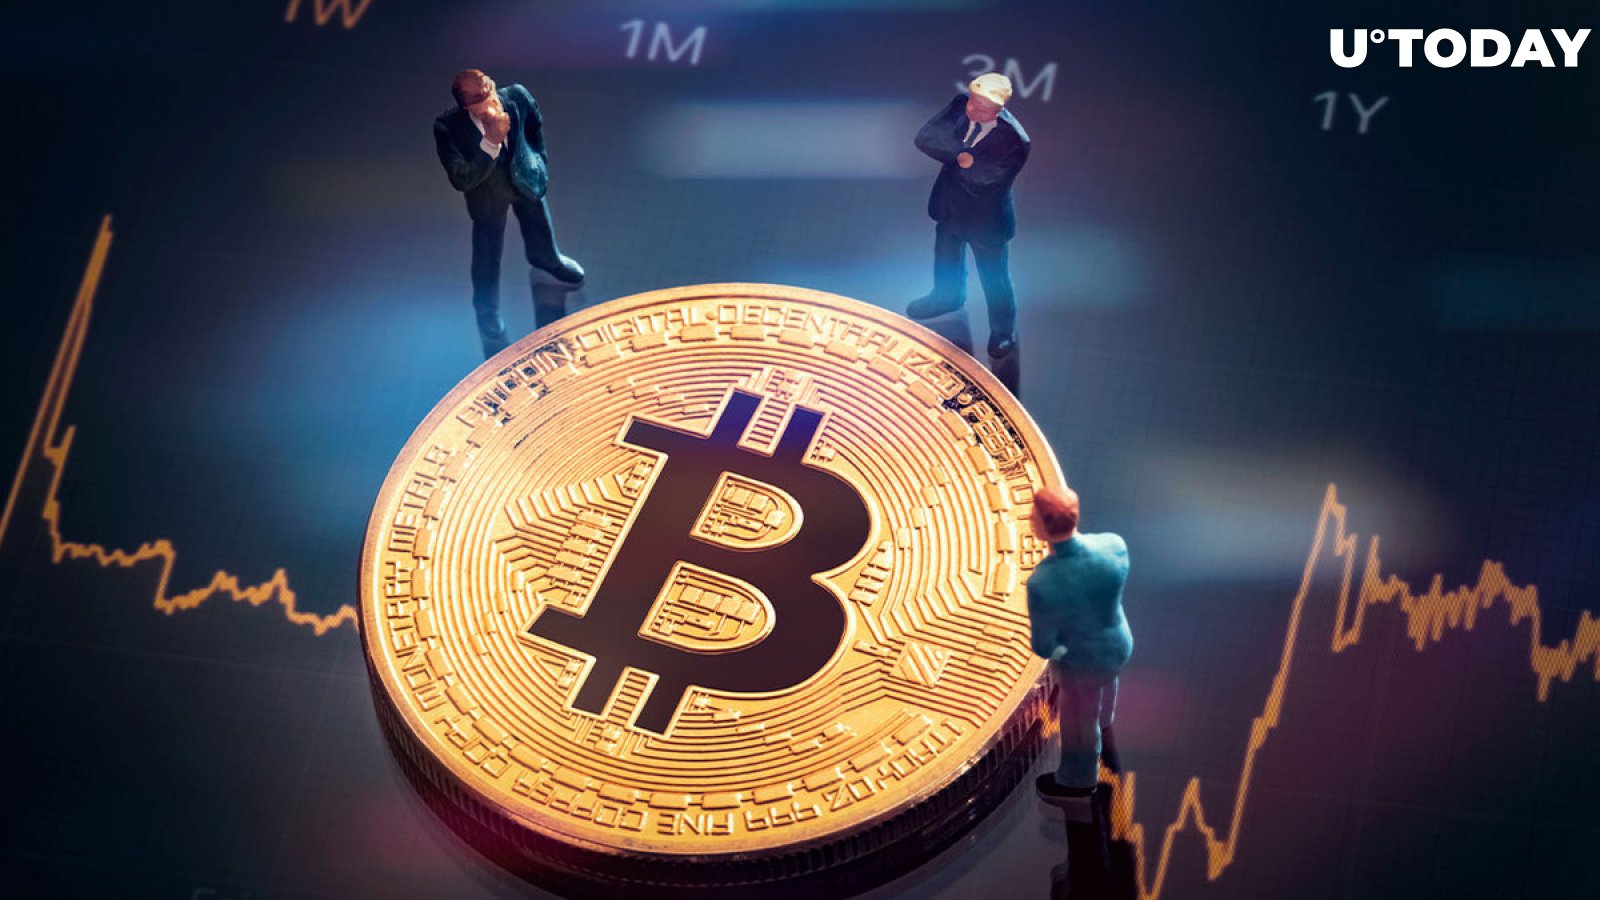 Here's Why You Should Watch Bitcoin Closely This Week